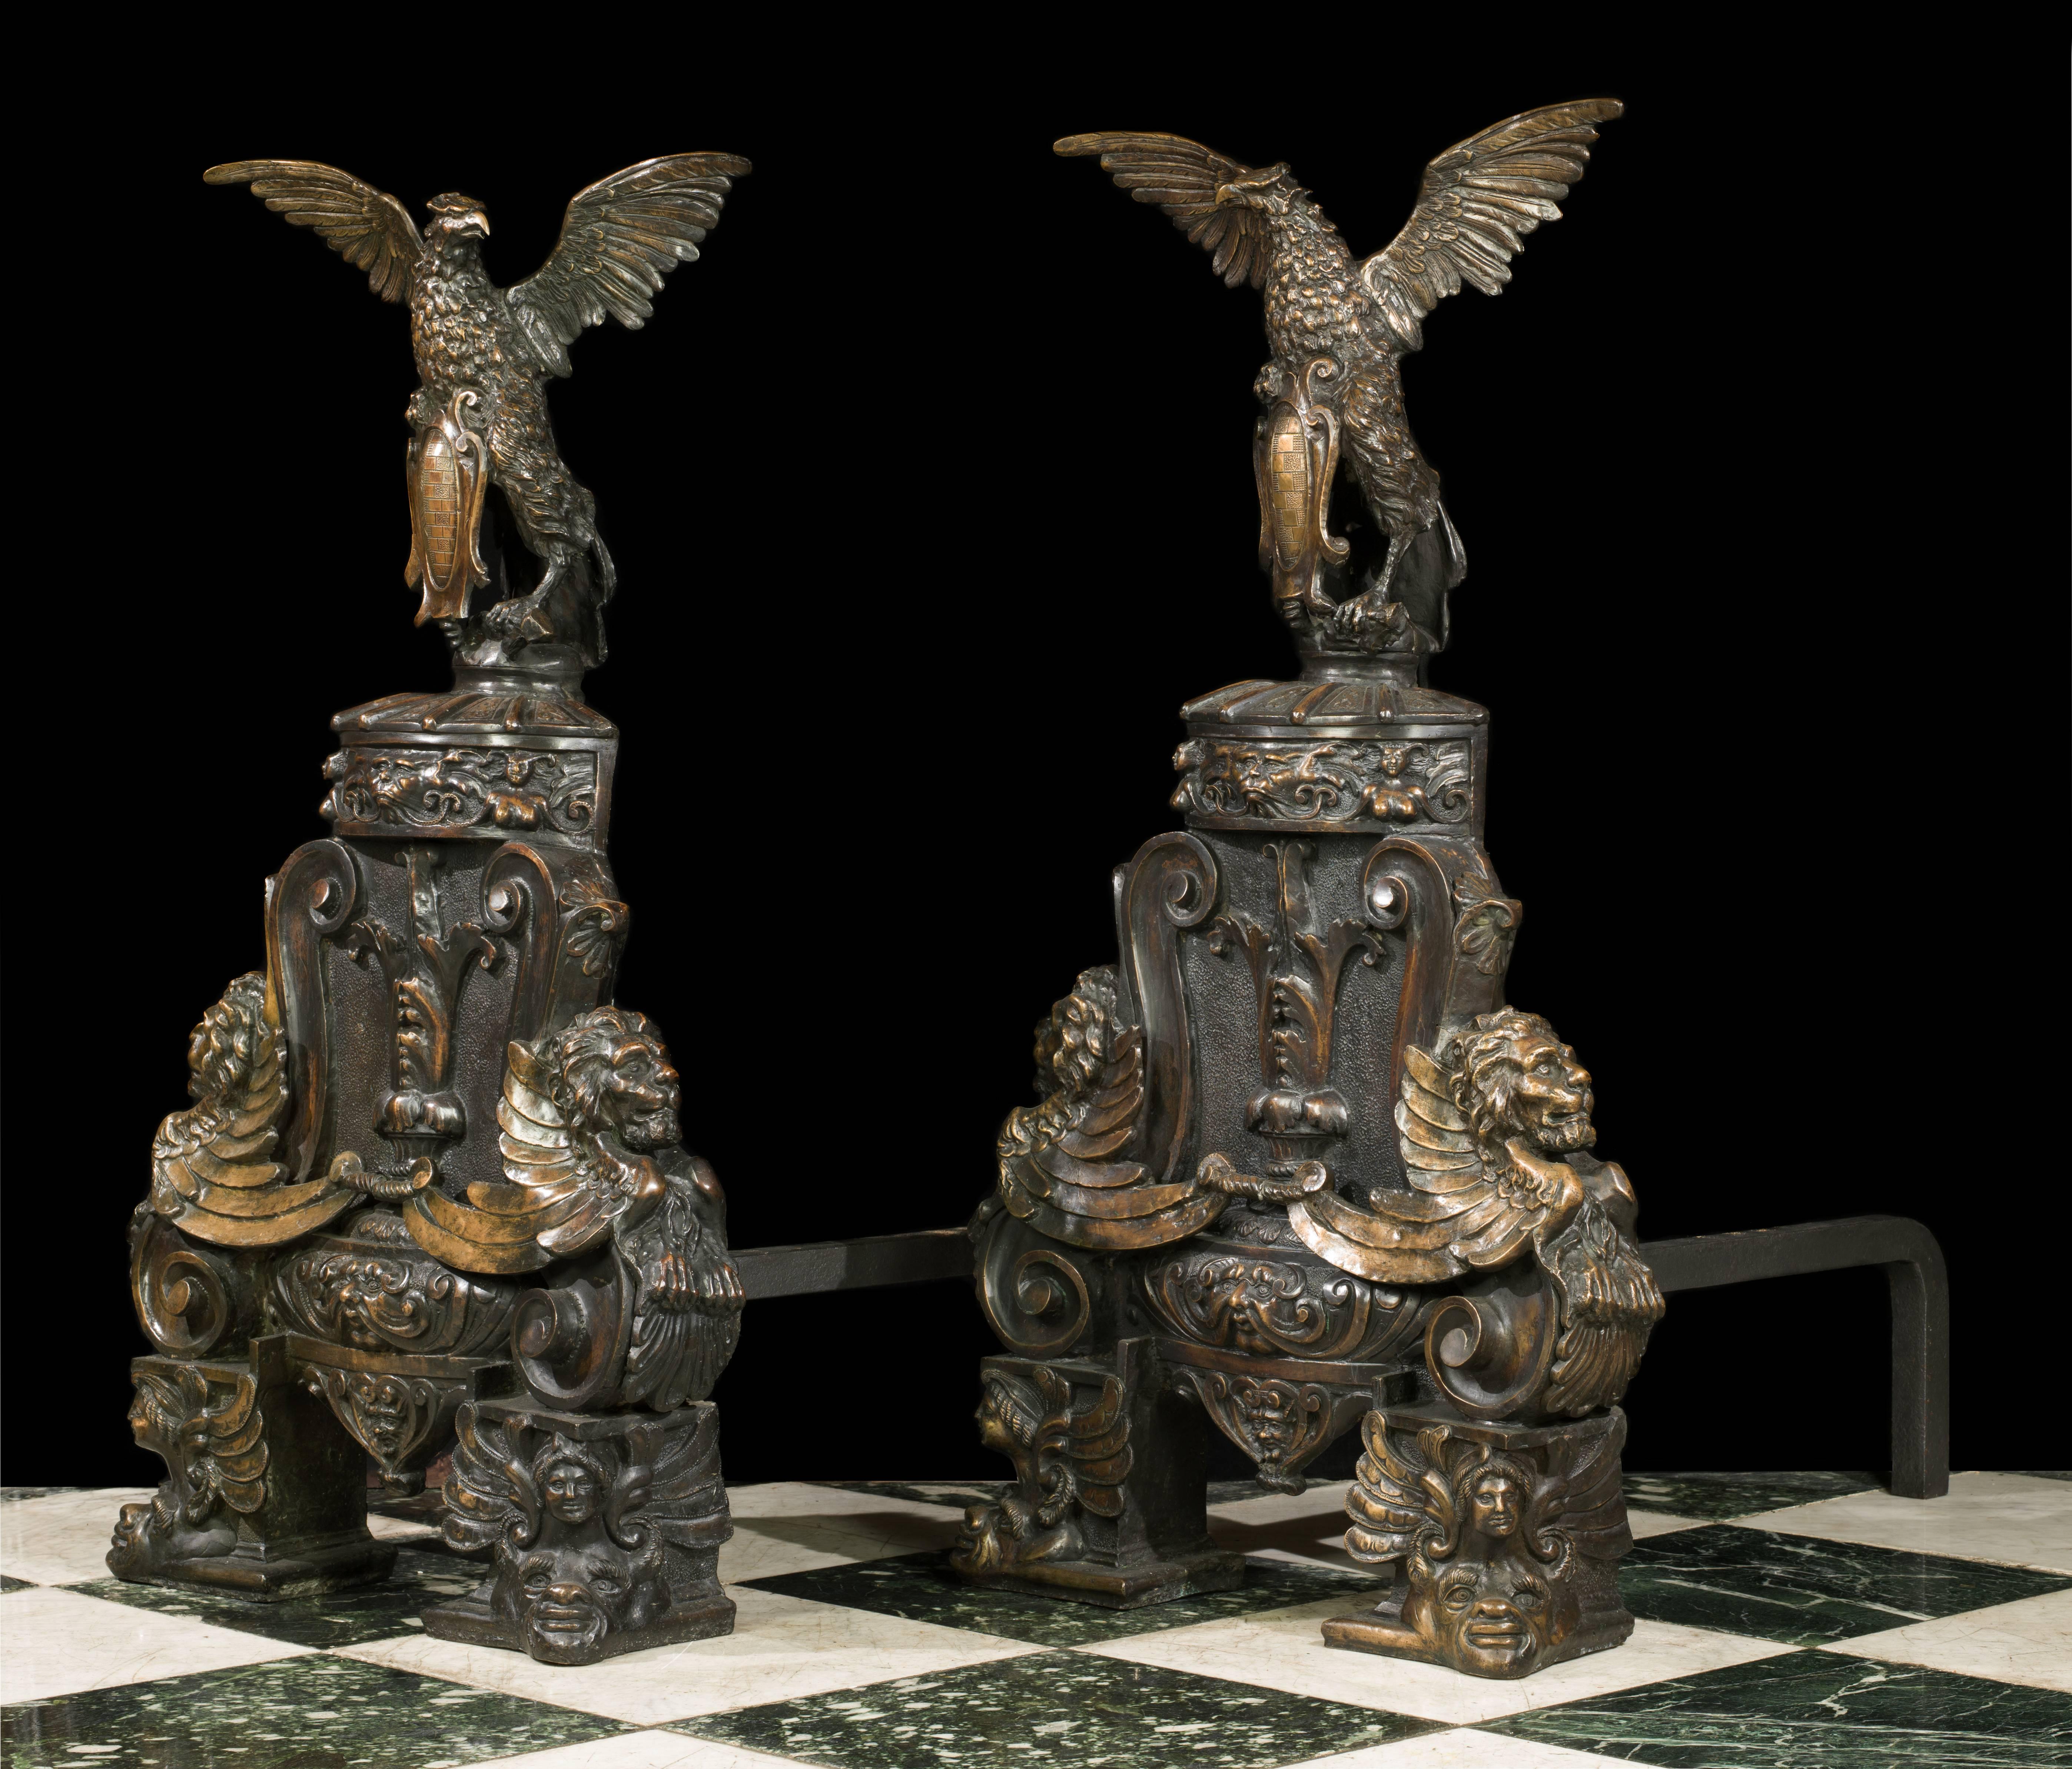 A pair of enormous and rather eccentric patinated bronze andirons in the Baronial Baroque manner. Each is surmounted by majestic spread winged eagles holding scrolled cartouche shields and perched on ornate drums decorated with mythical beasts and